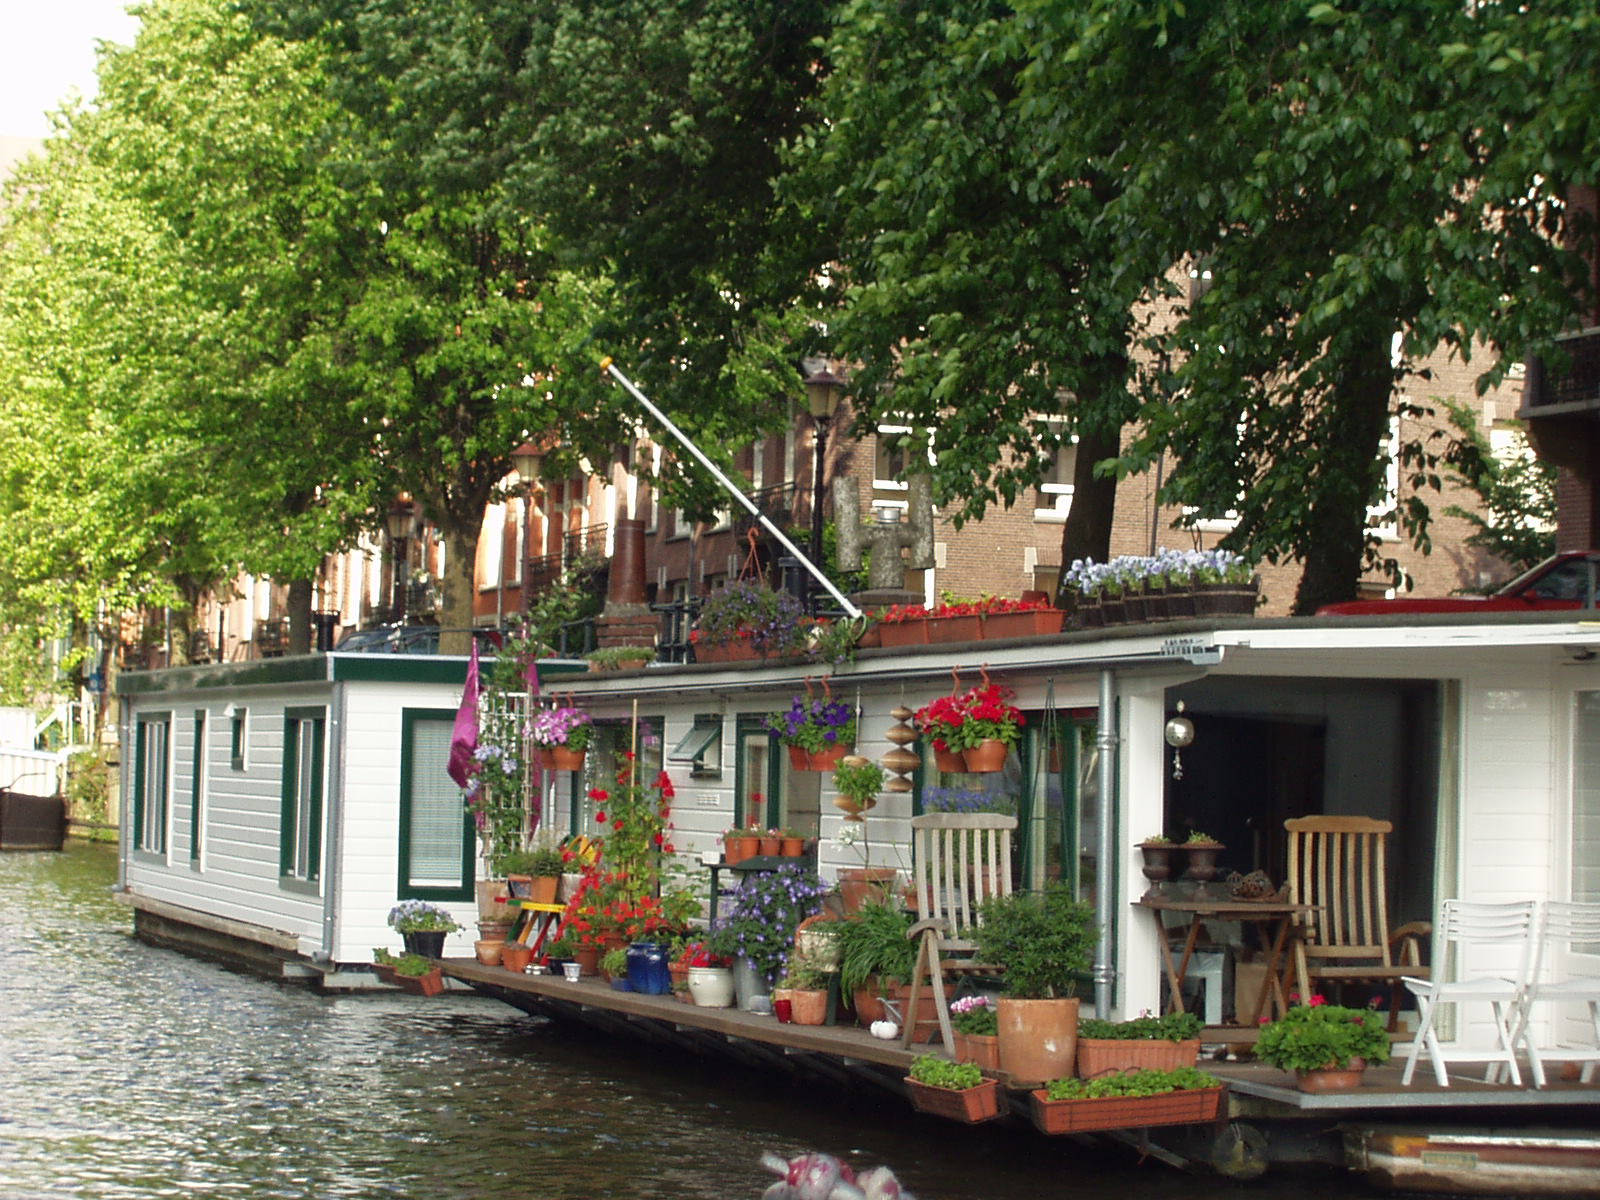 My dream house, Amsterdam, the Netherlands.